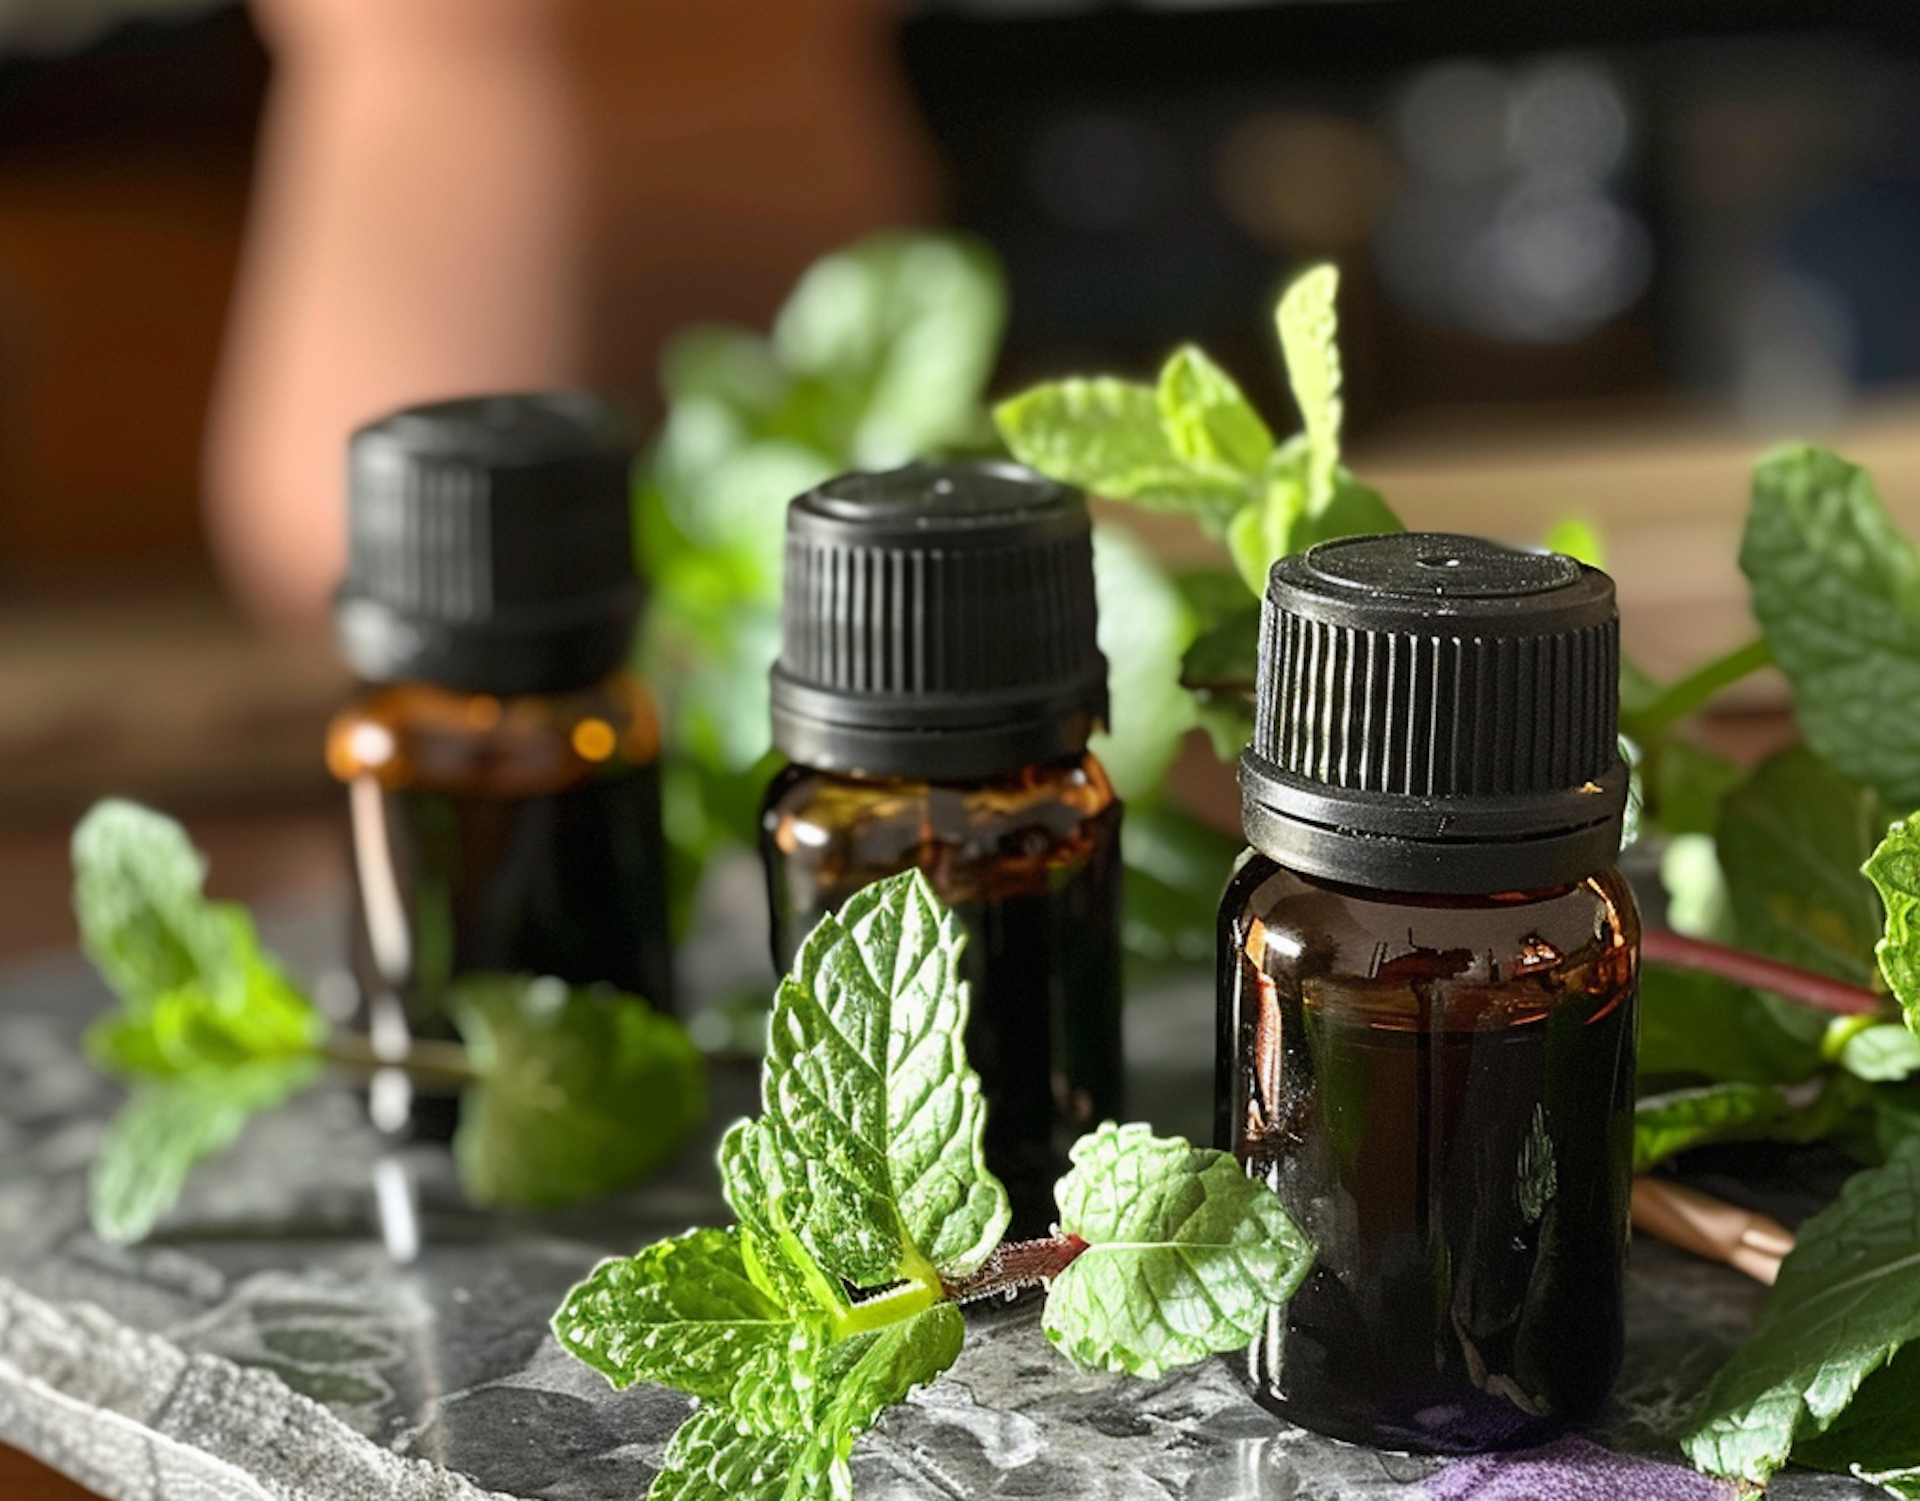 essential oils extracted from herbs are known to repel bugs